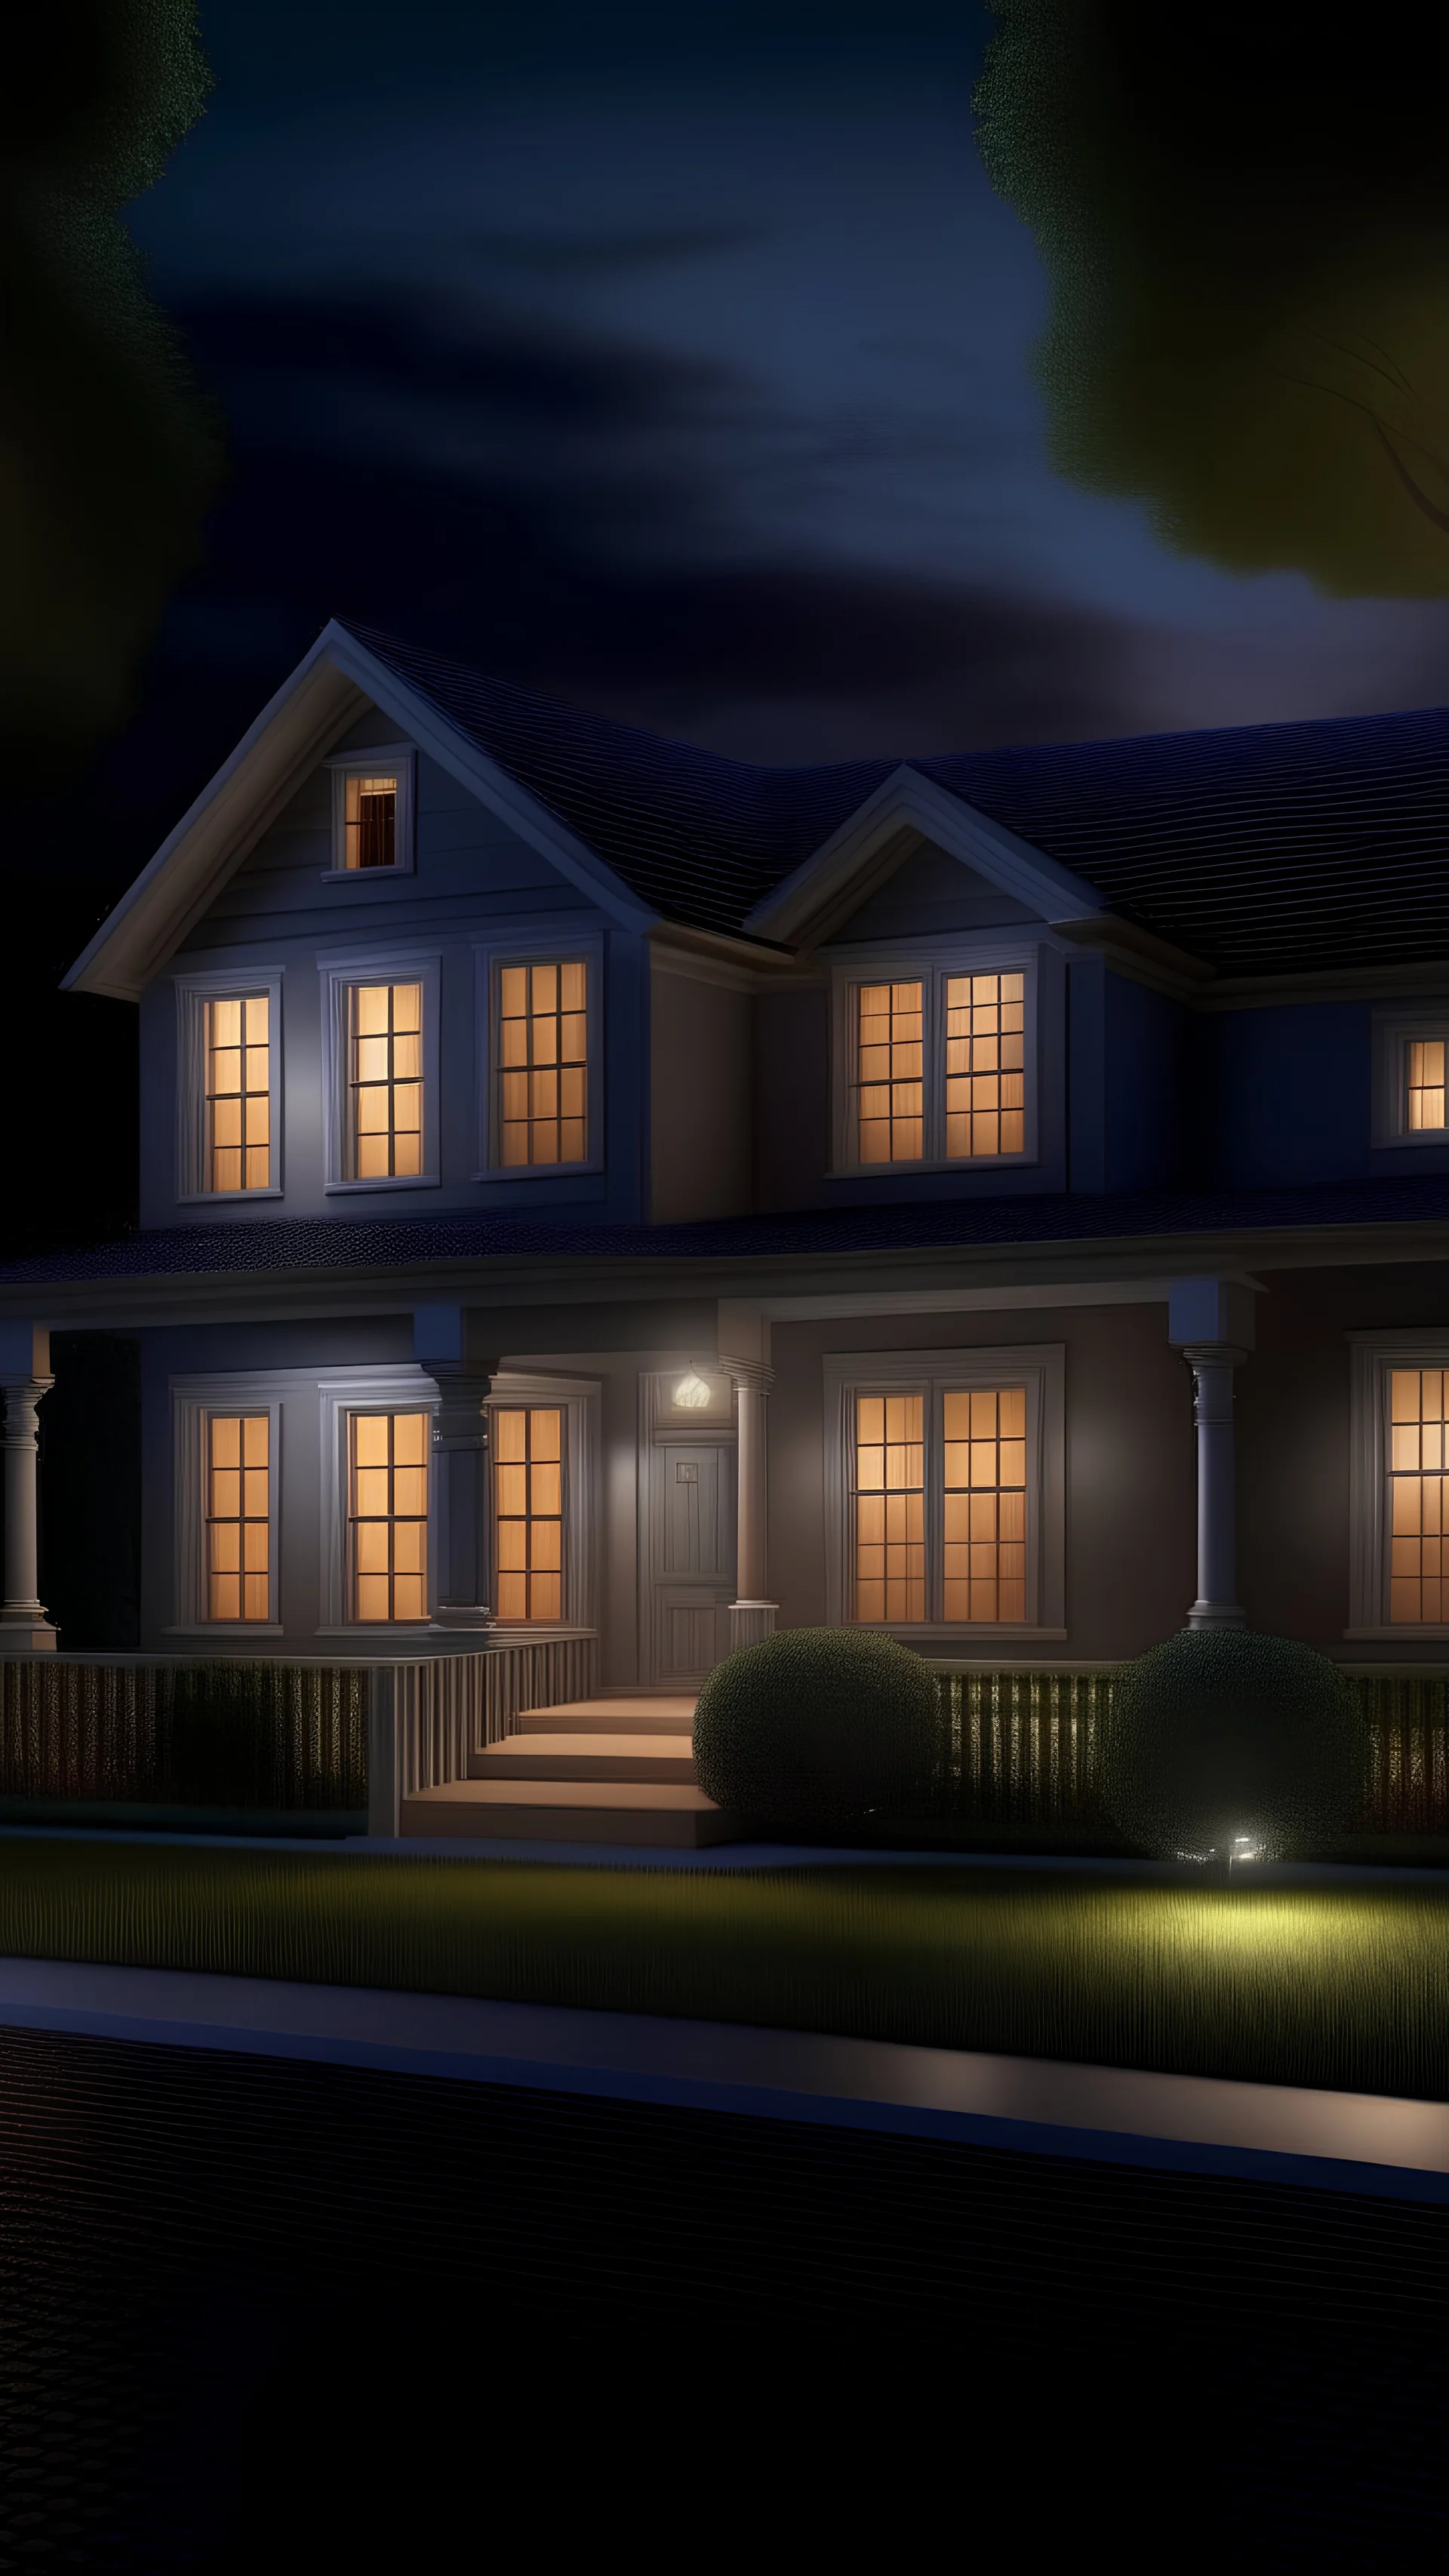 Illustrate a house at dusk with automated exterior lights turning on, highlighting both security and aesthetic aspects.